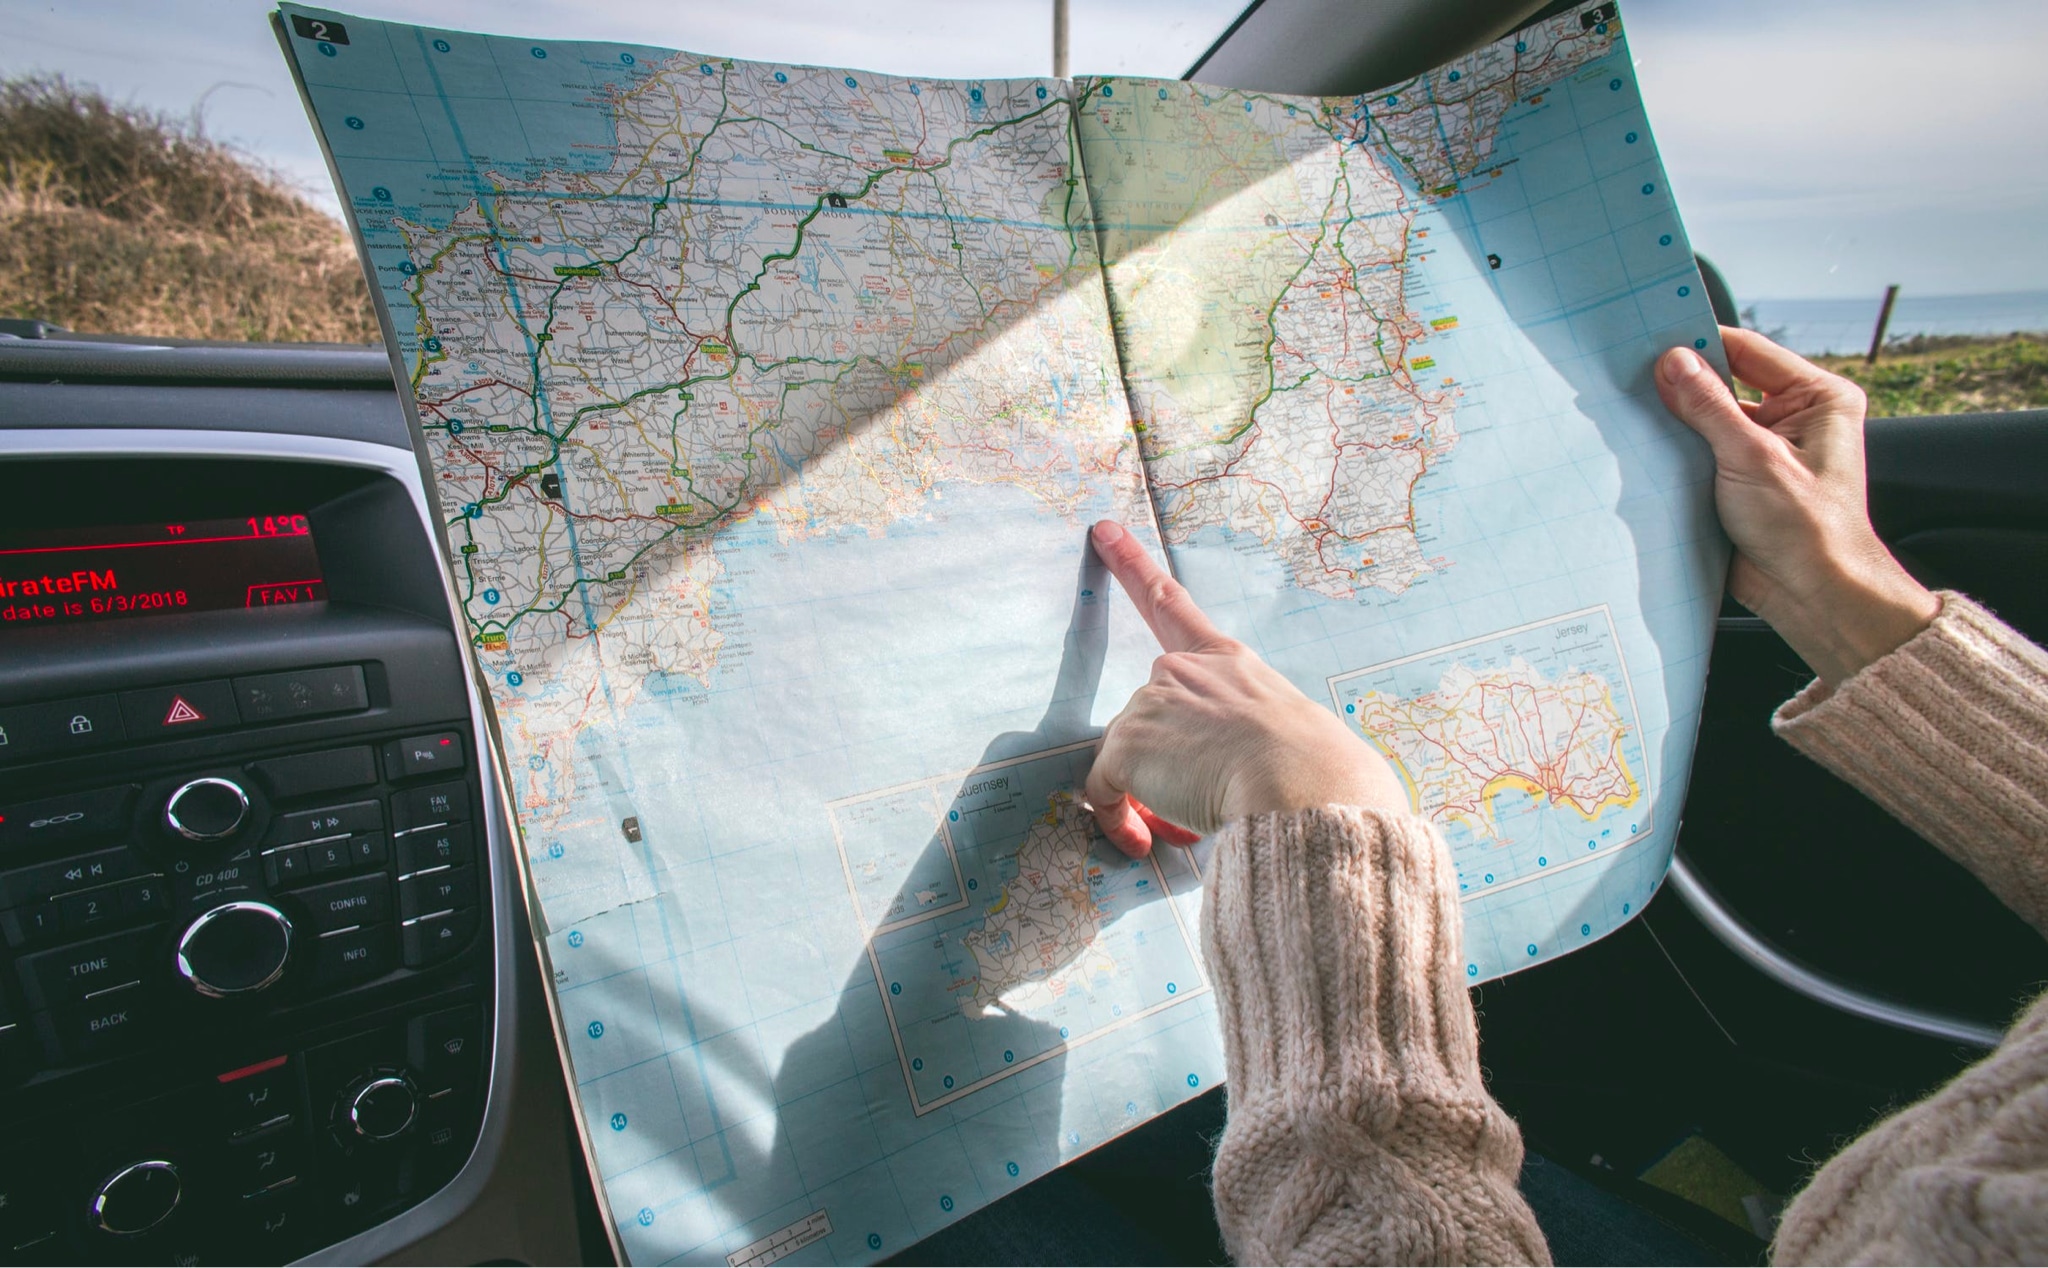 Make Sure You Do These 10 Things Before Your Next Road Trip